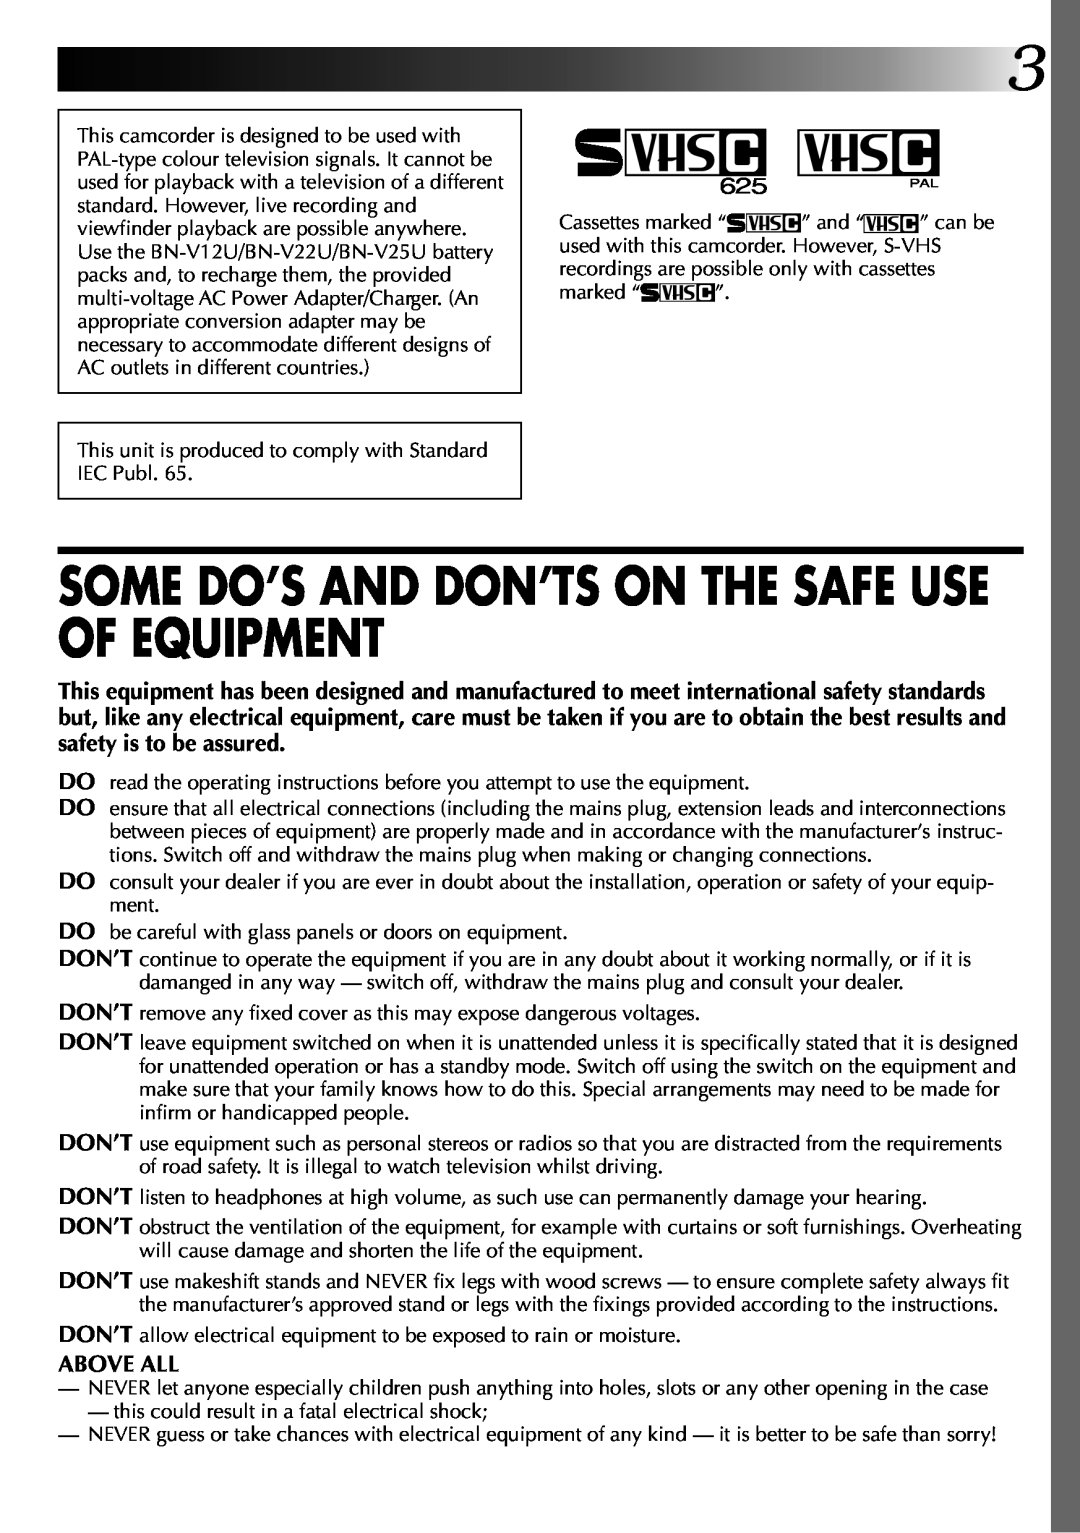 JVC 0597TOV*UN*VP, LYT0002-0Q4A specifications Some Do’S And Don’Ts On The Safe Use Of Equipment, Above All 